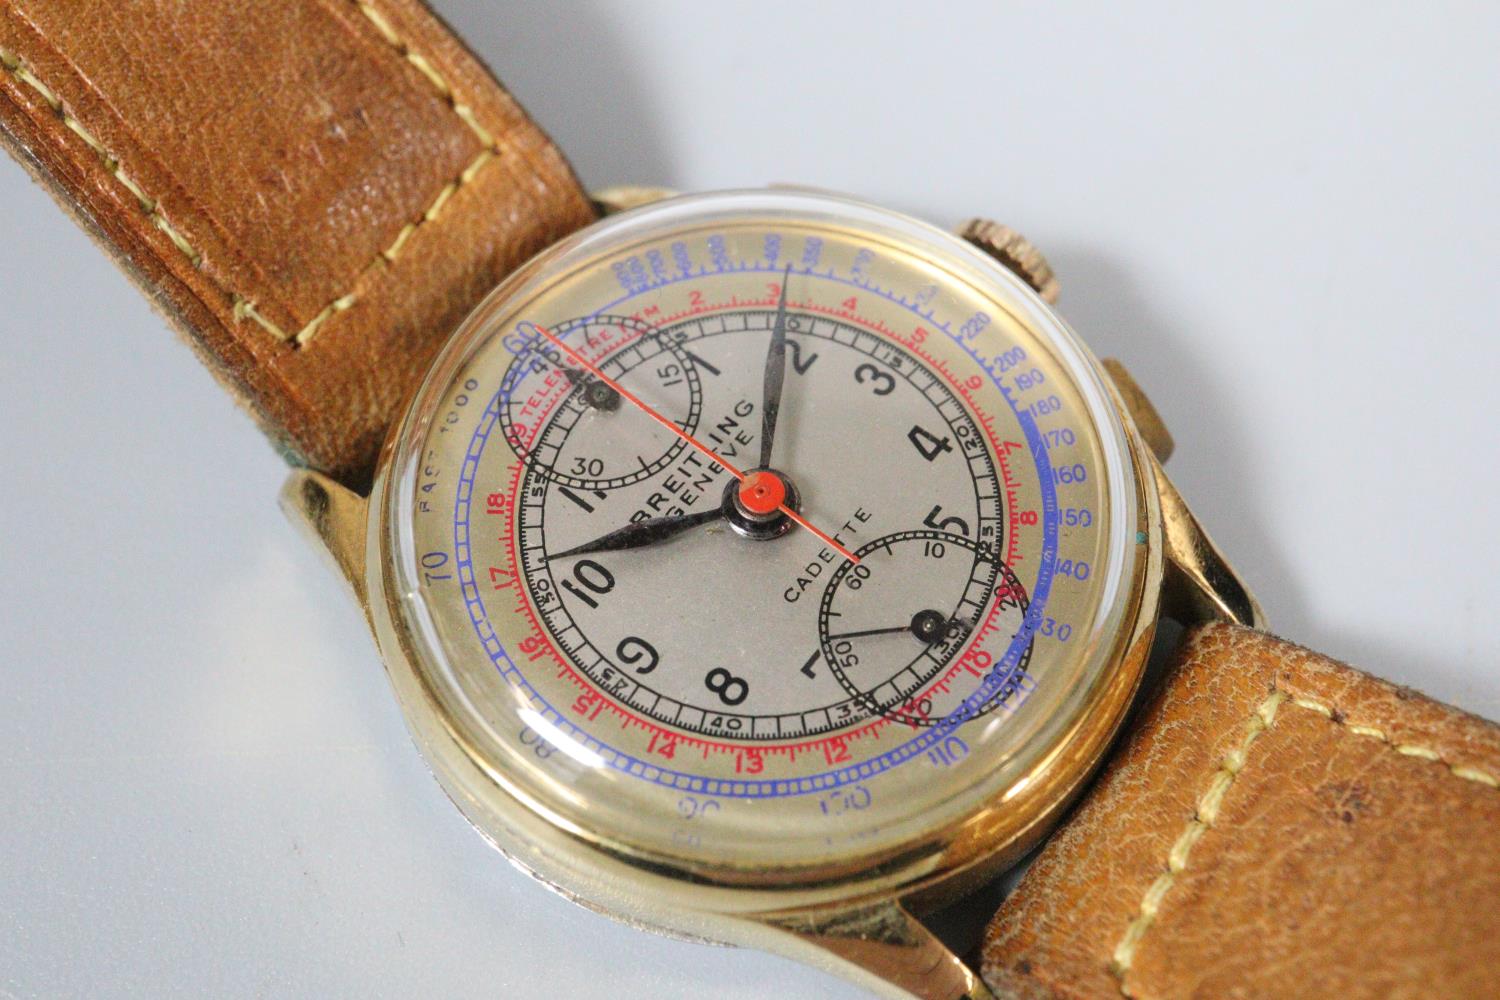 Vintage Breitling 'Cadette' gold plated gentleman's chronograph wristwatch with two button sweep - Image 2 of 2